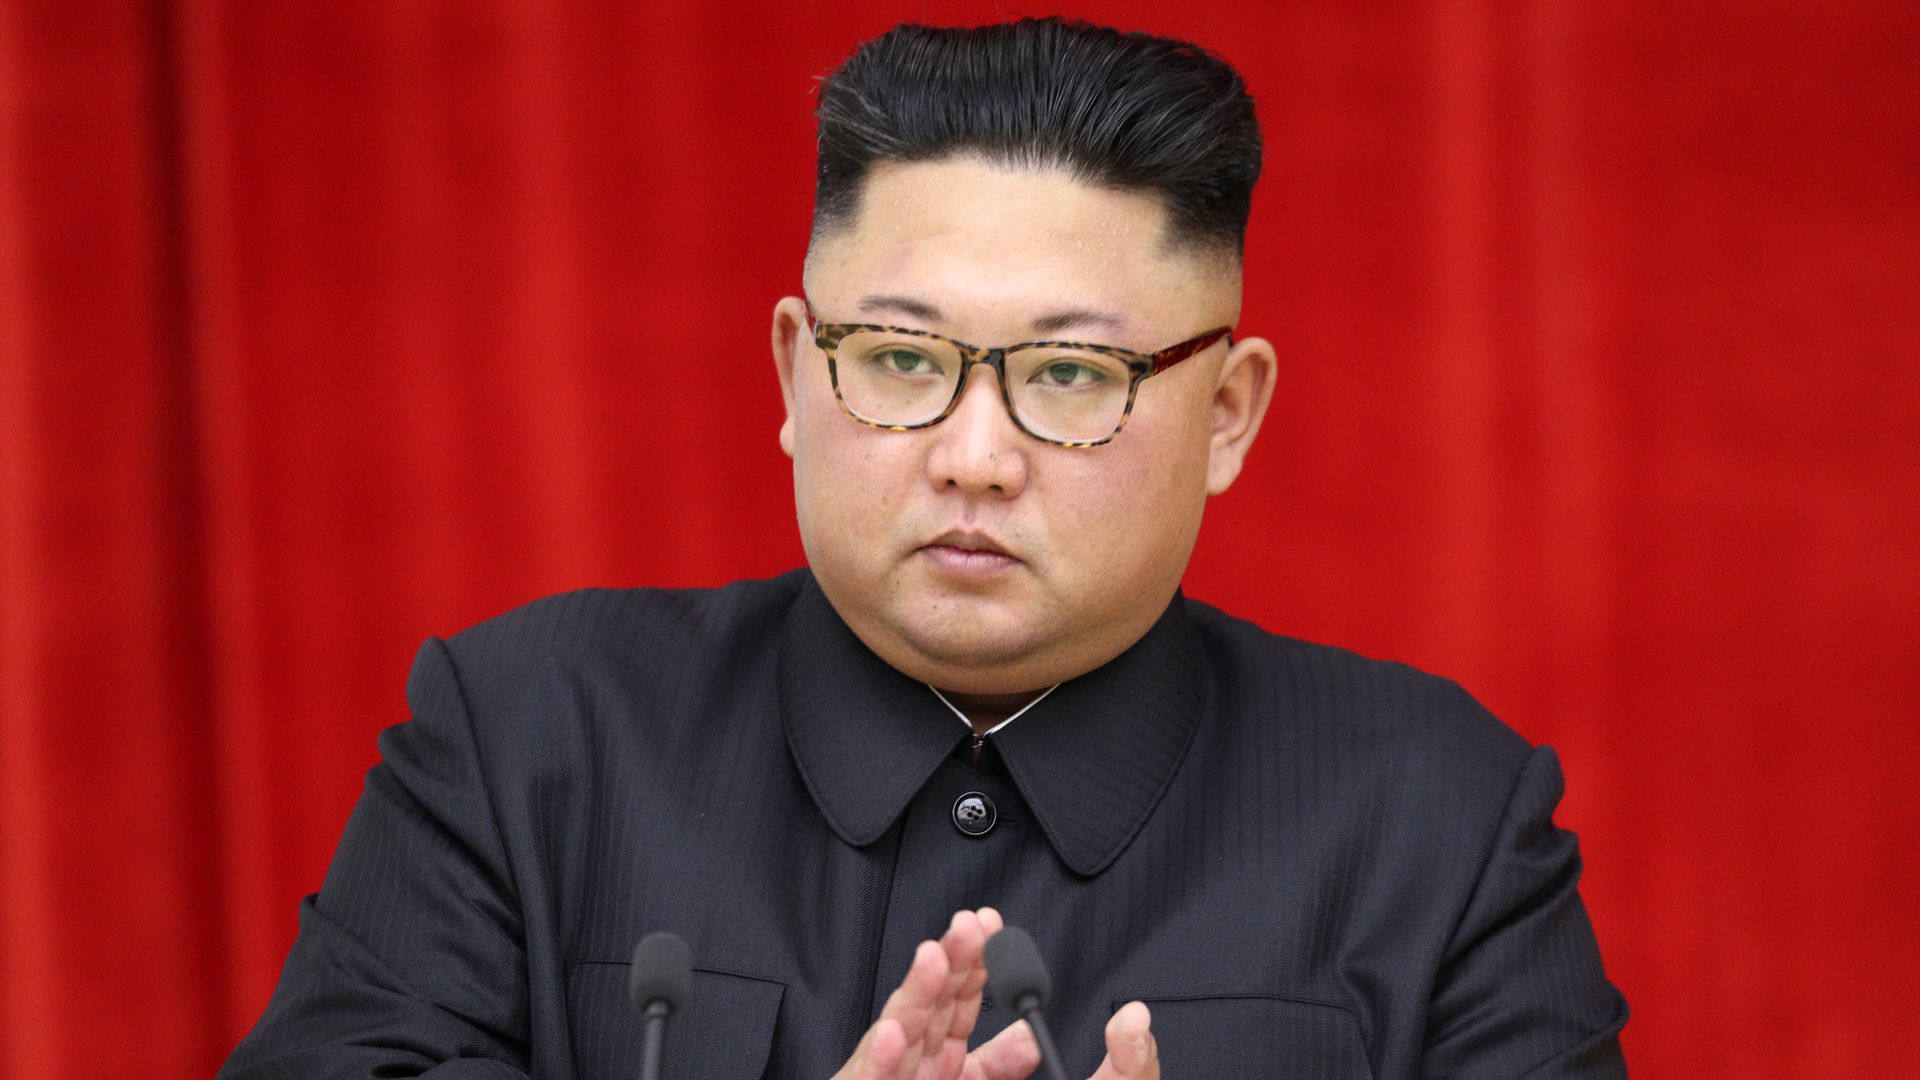 Kim Jong-un looks mad and claps.